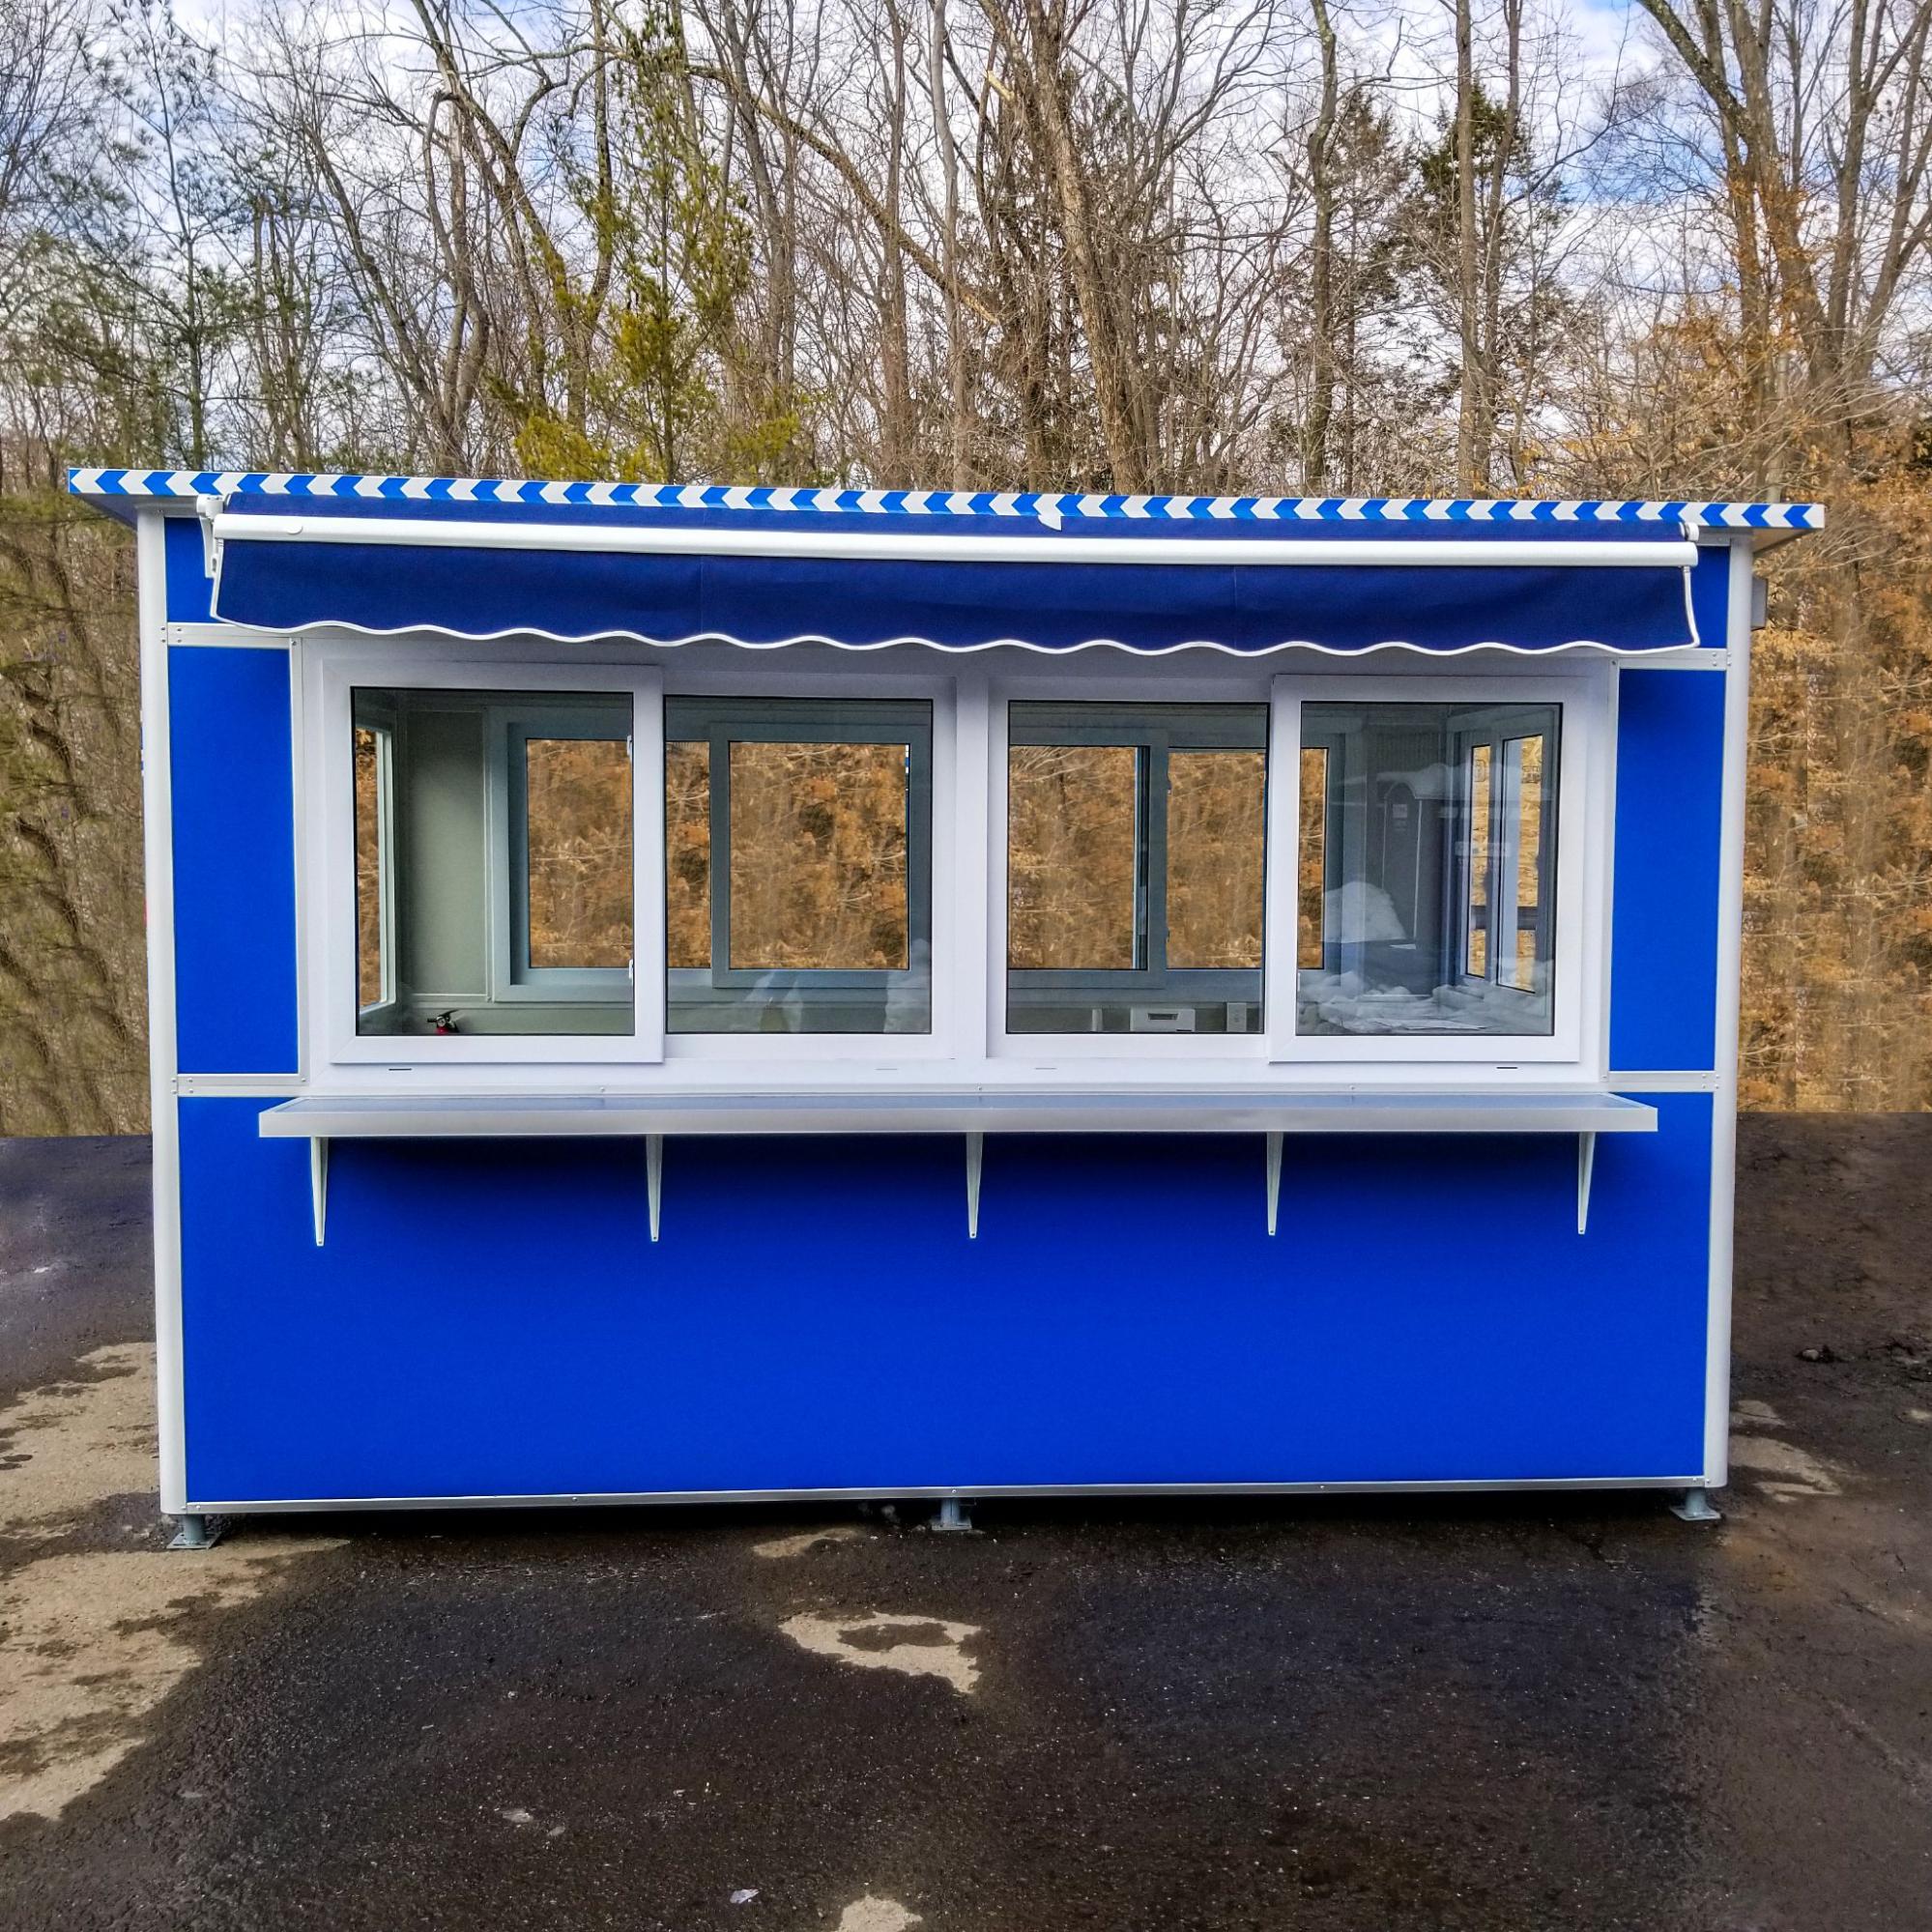 A blue prefabricated booth featuring large sliding windows and a striped roll-up awning